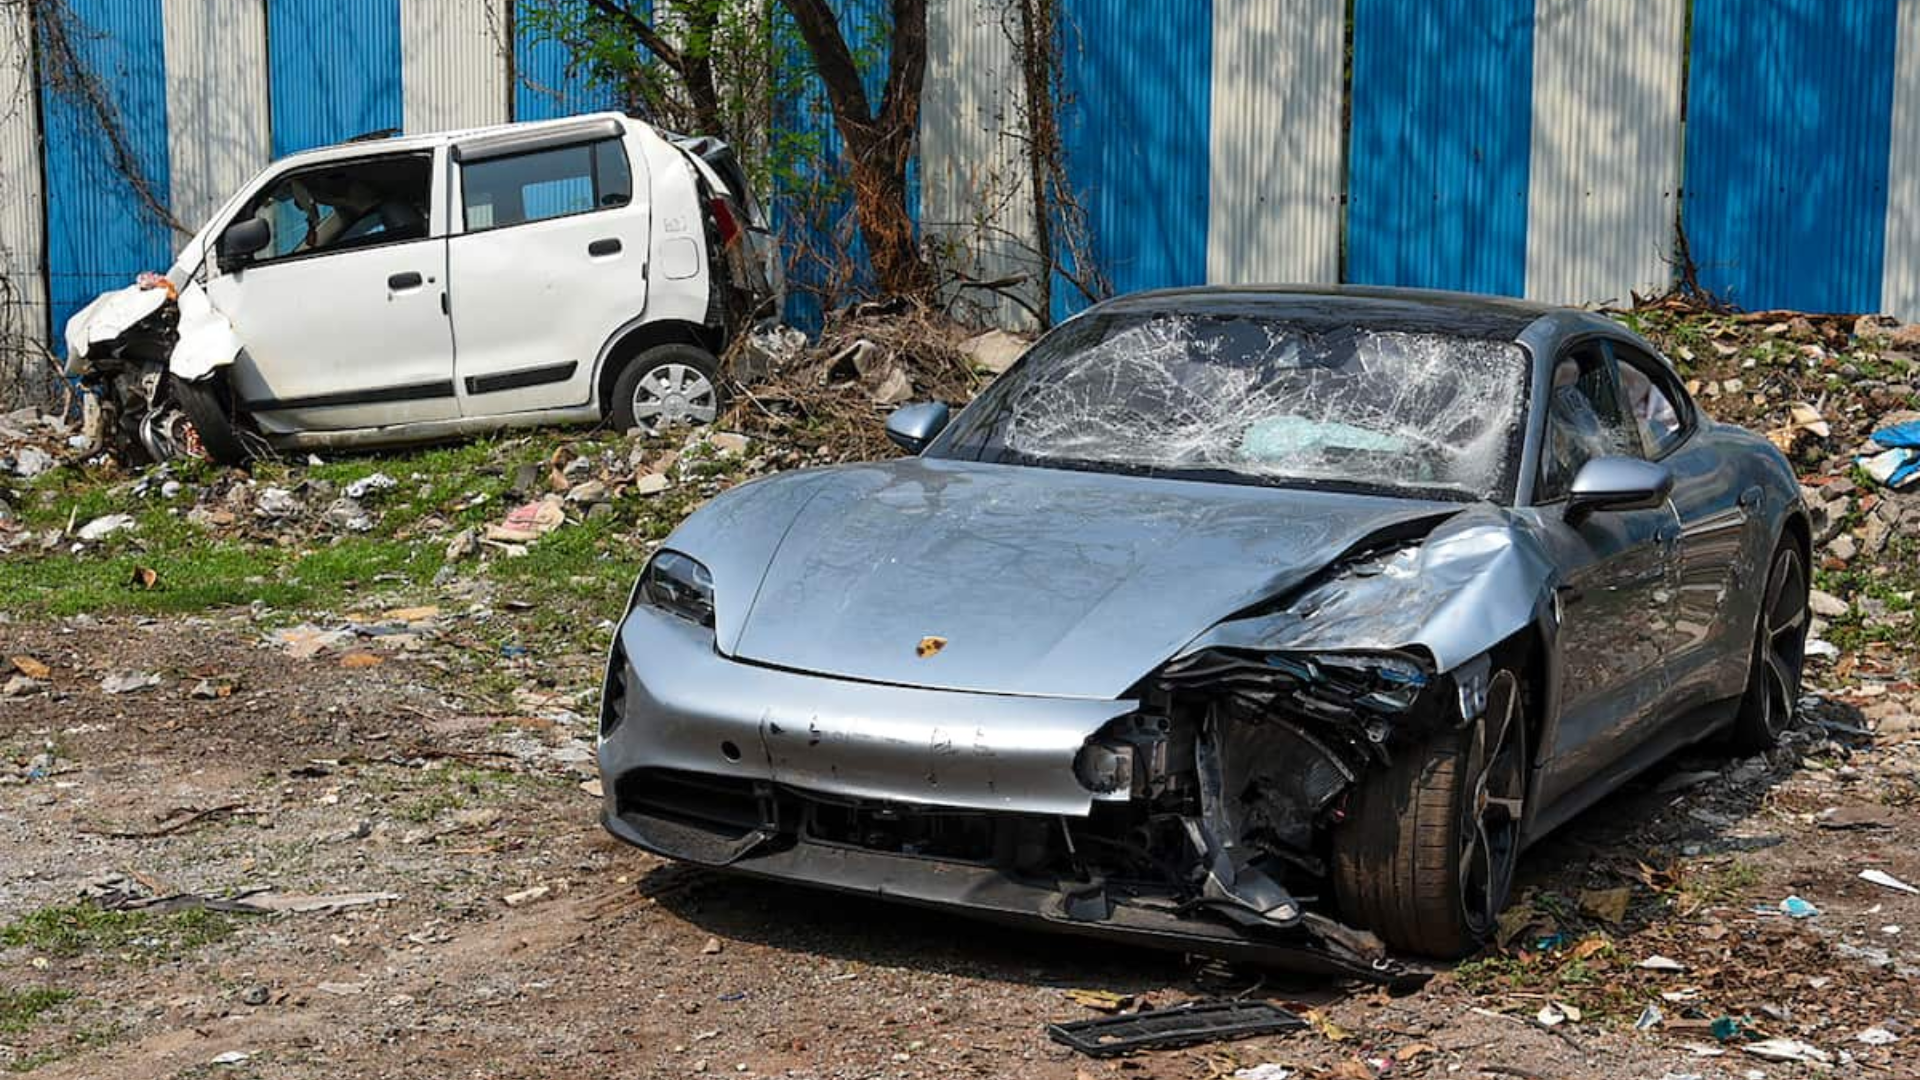 Pune Porsche Crash: Mother of 17-Year-Old Teen Asks Police To Protect Her Son